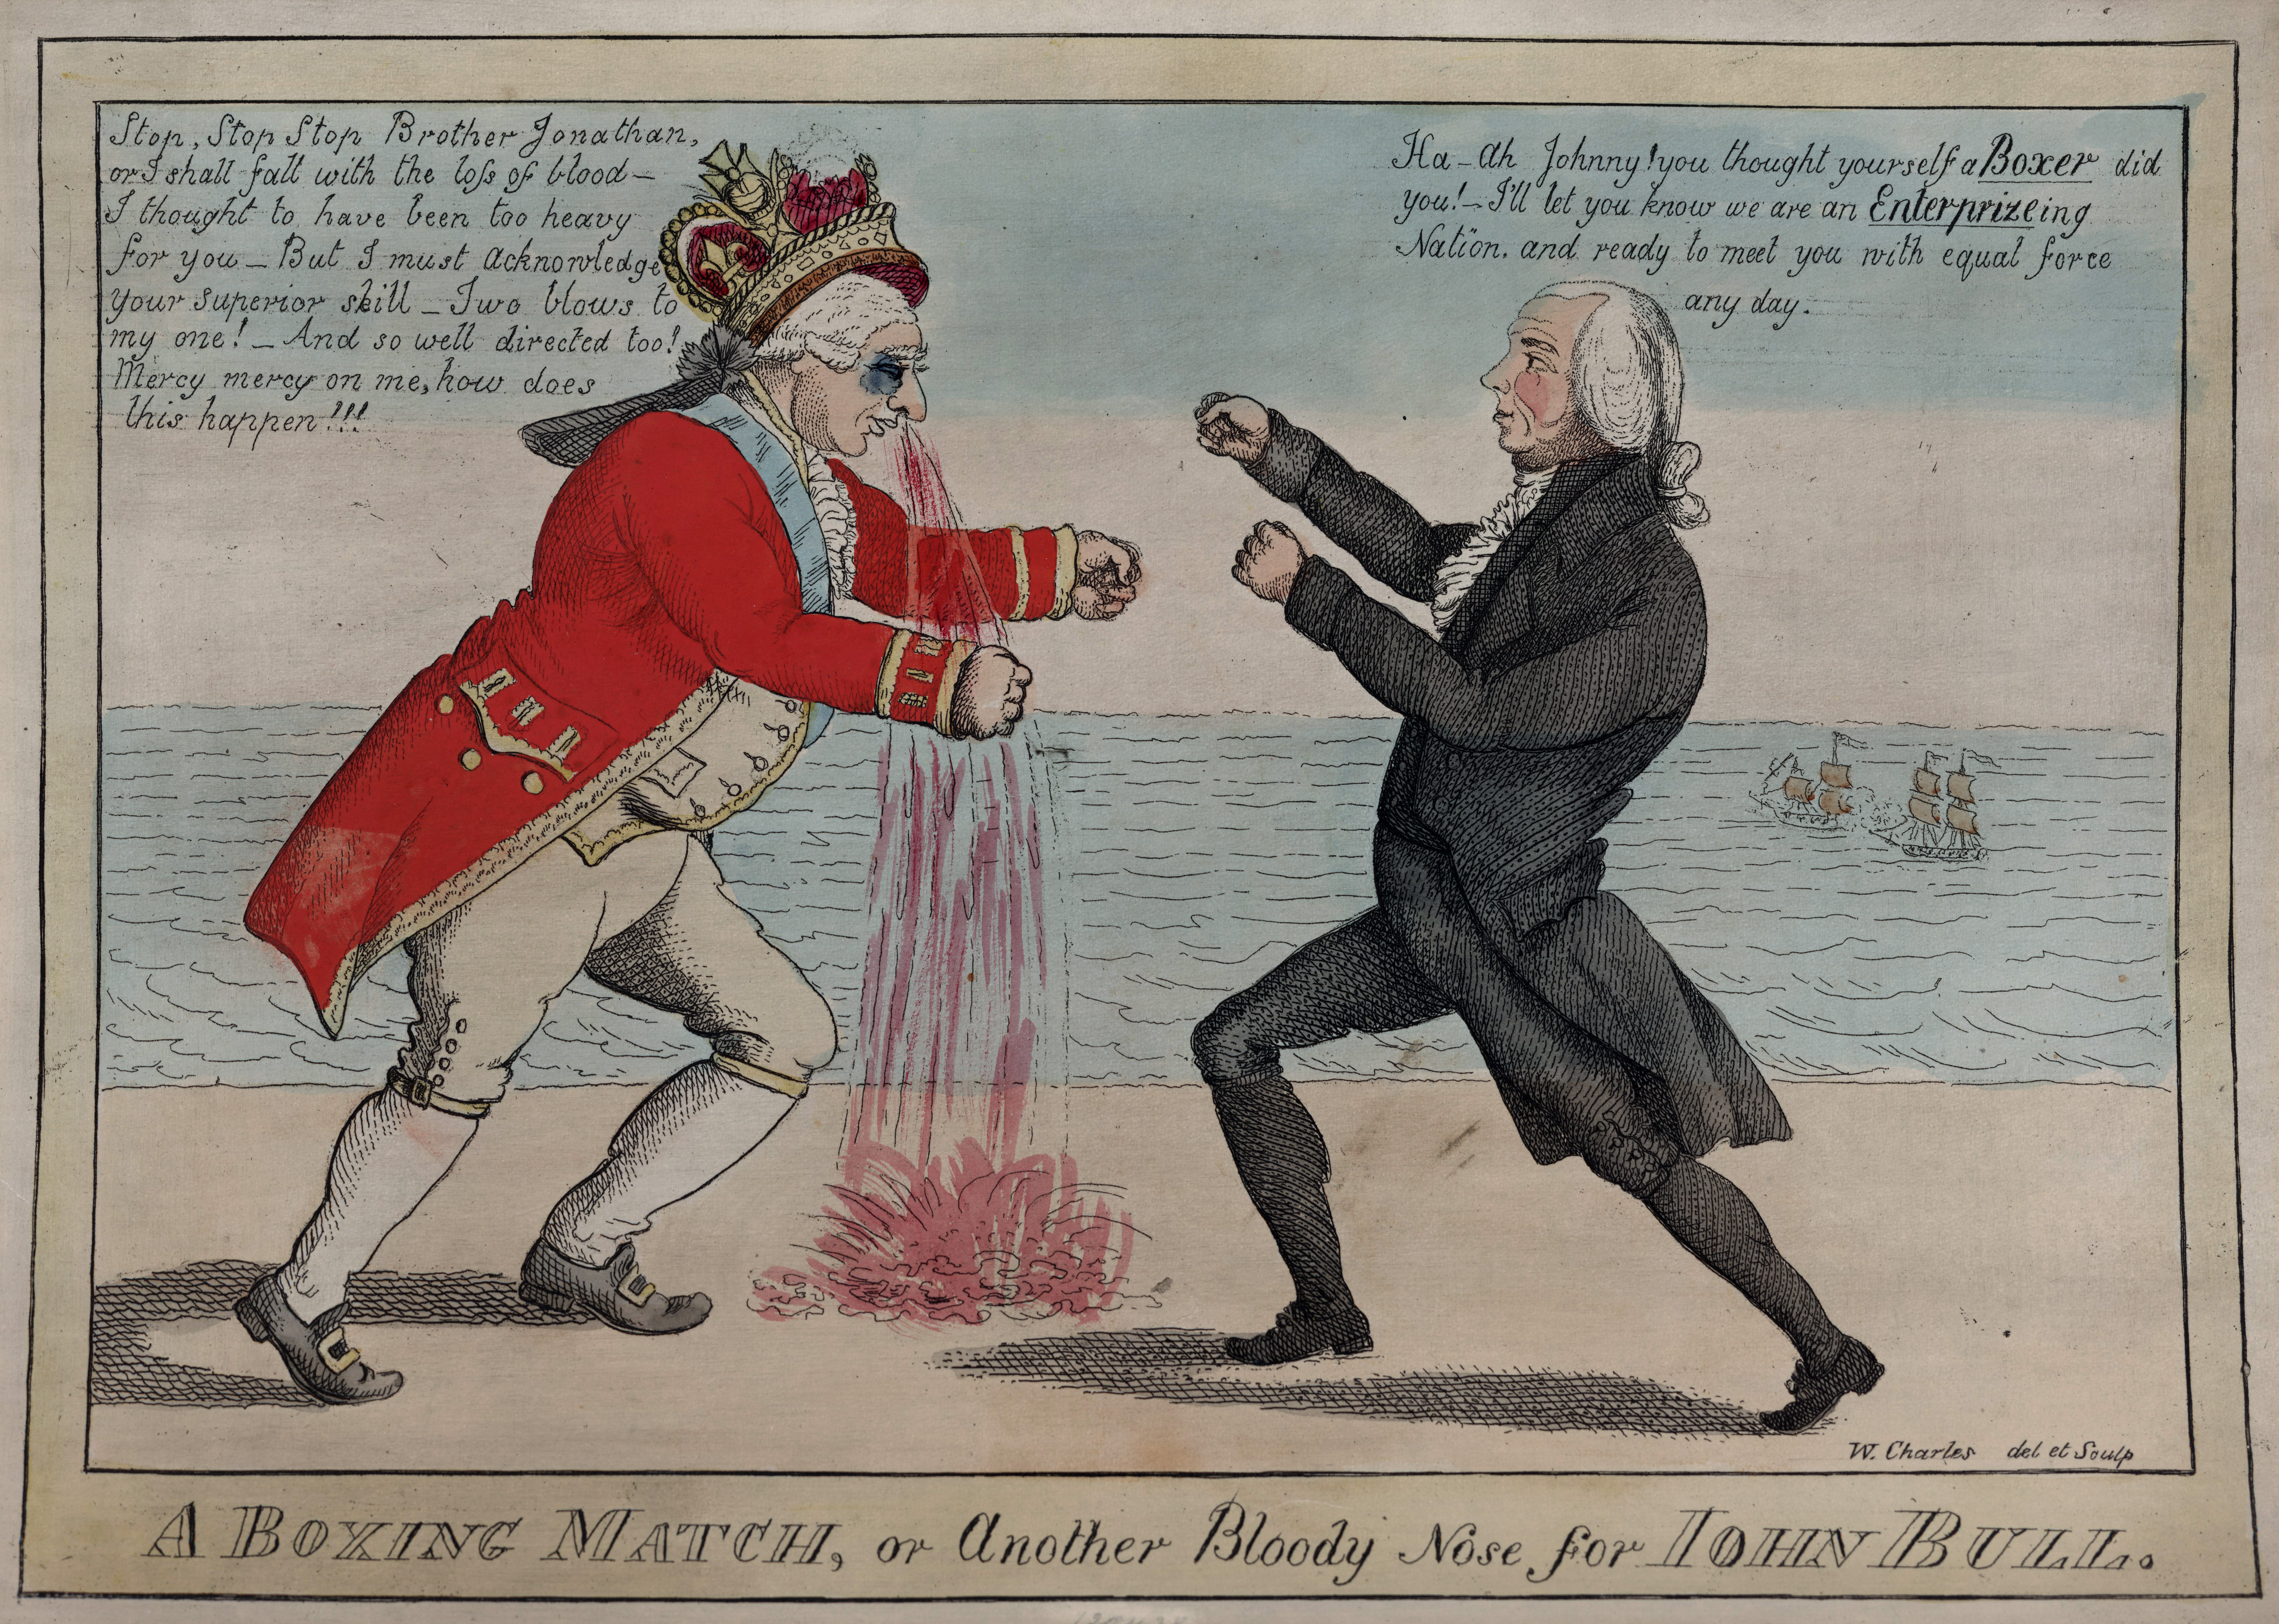 Political Cartoon, "A Boxing Match, or Another Bloody Nose for John Bull" by W. Charles